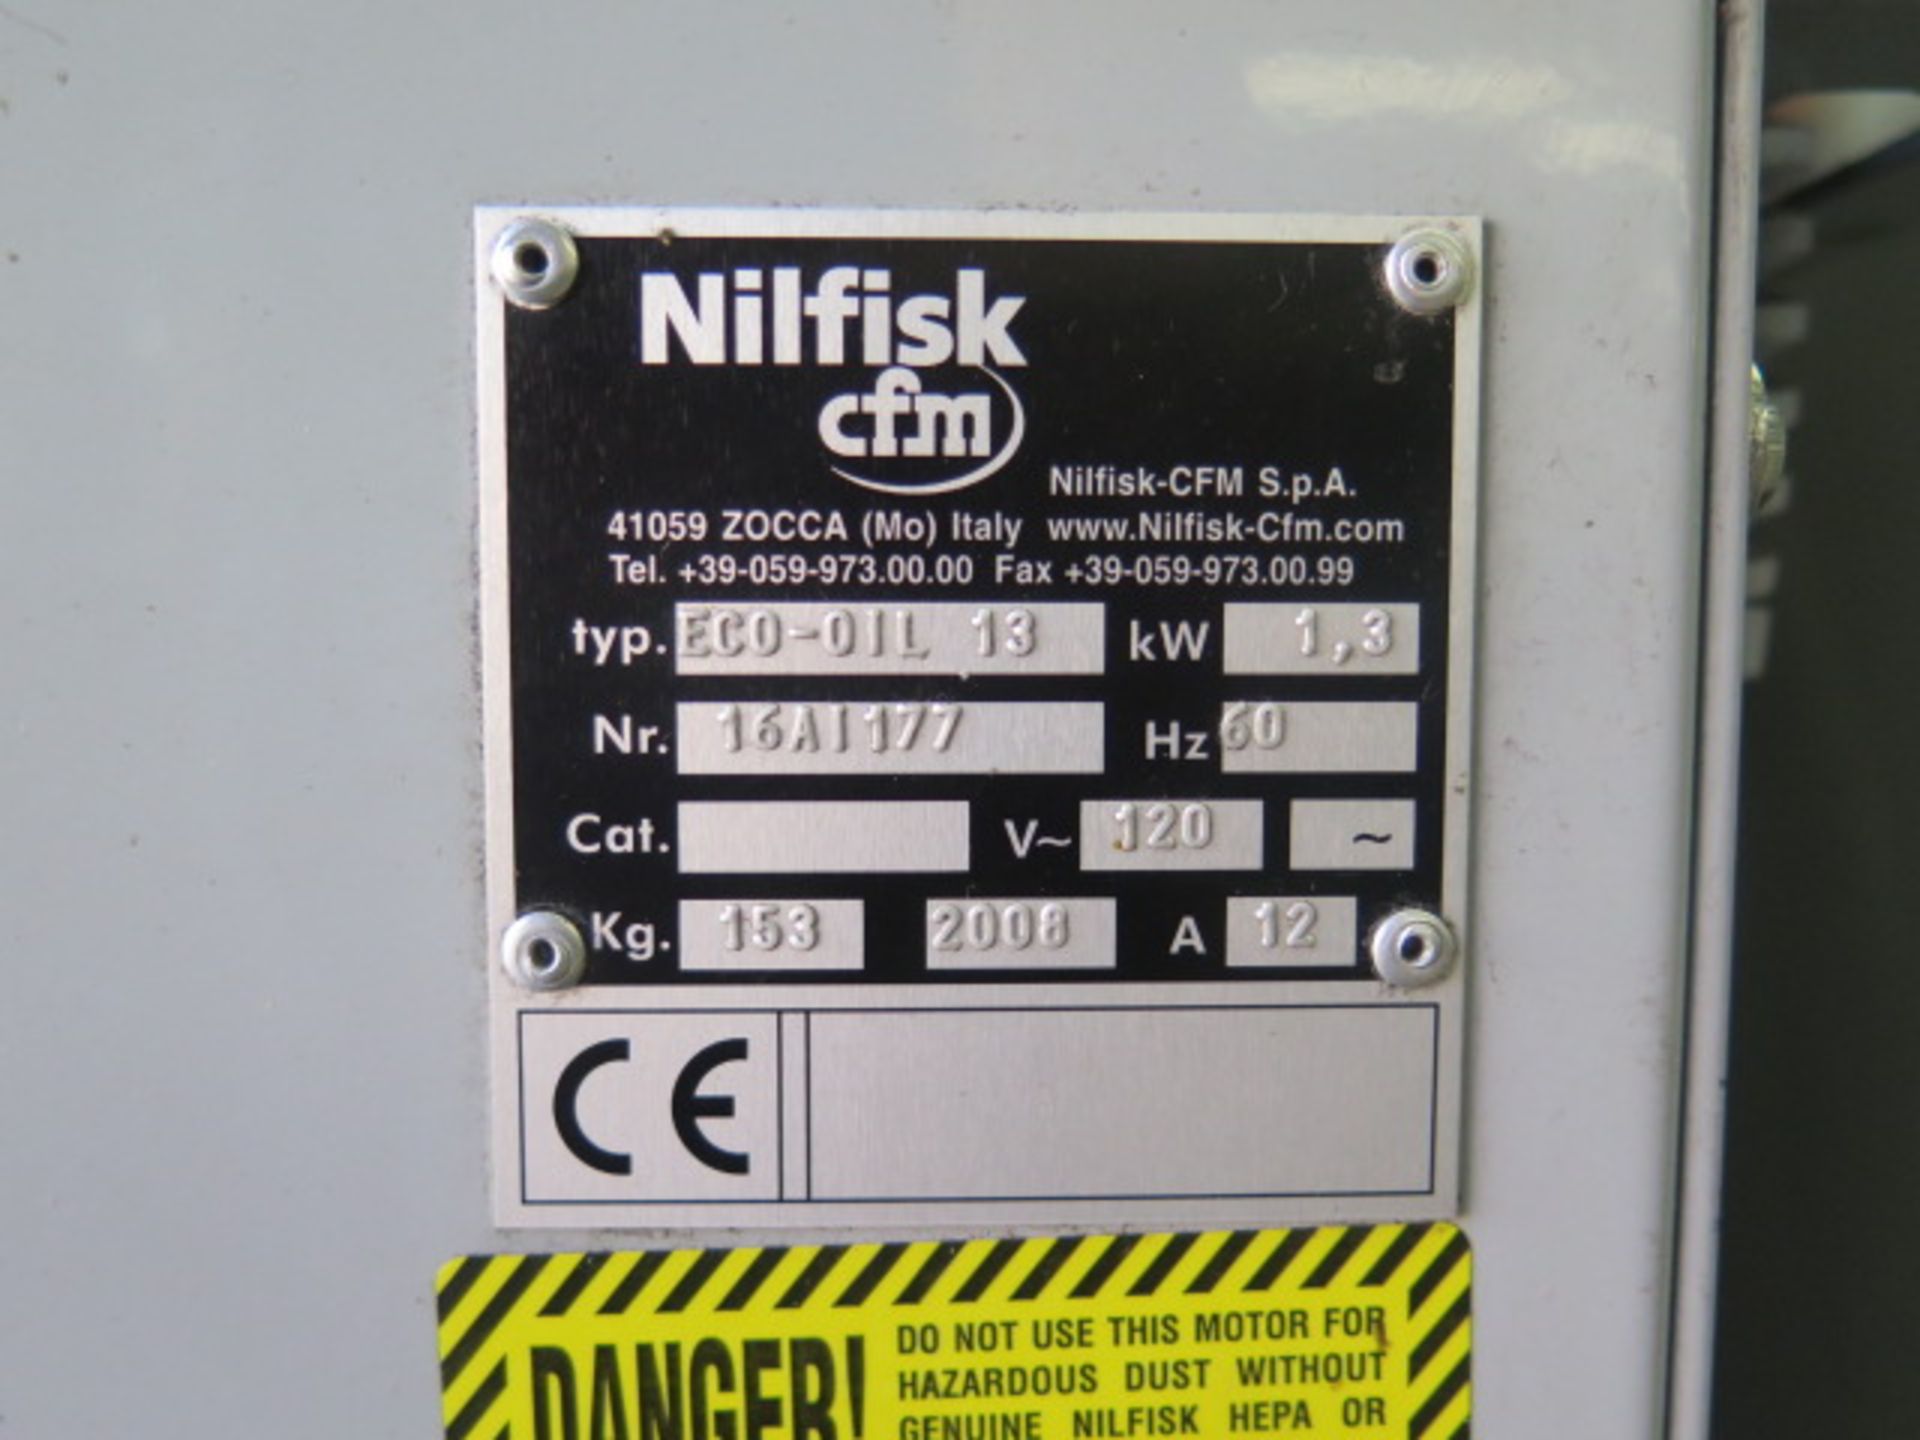 Nilfisk CFM Type ECO-10613 Industrial Vacuum s/n 16AI177 (SOLD AS-IS - NO WARRANTY) - Image 8 of 8